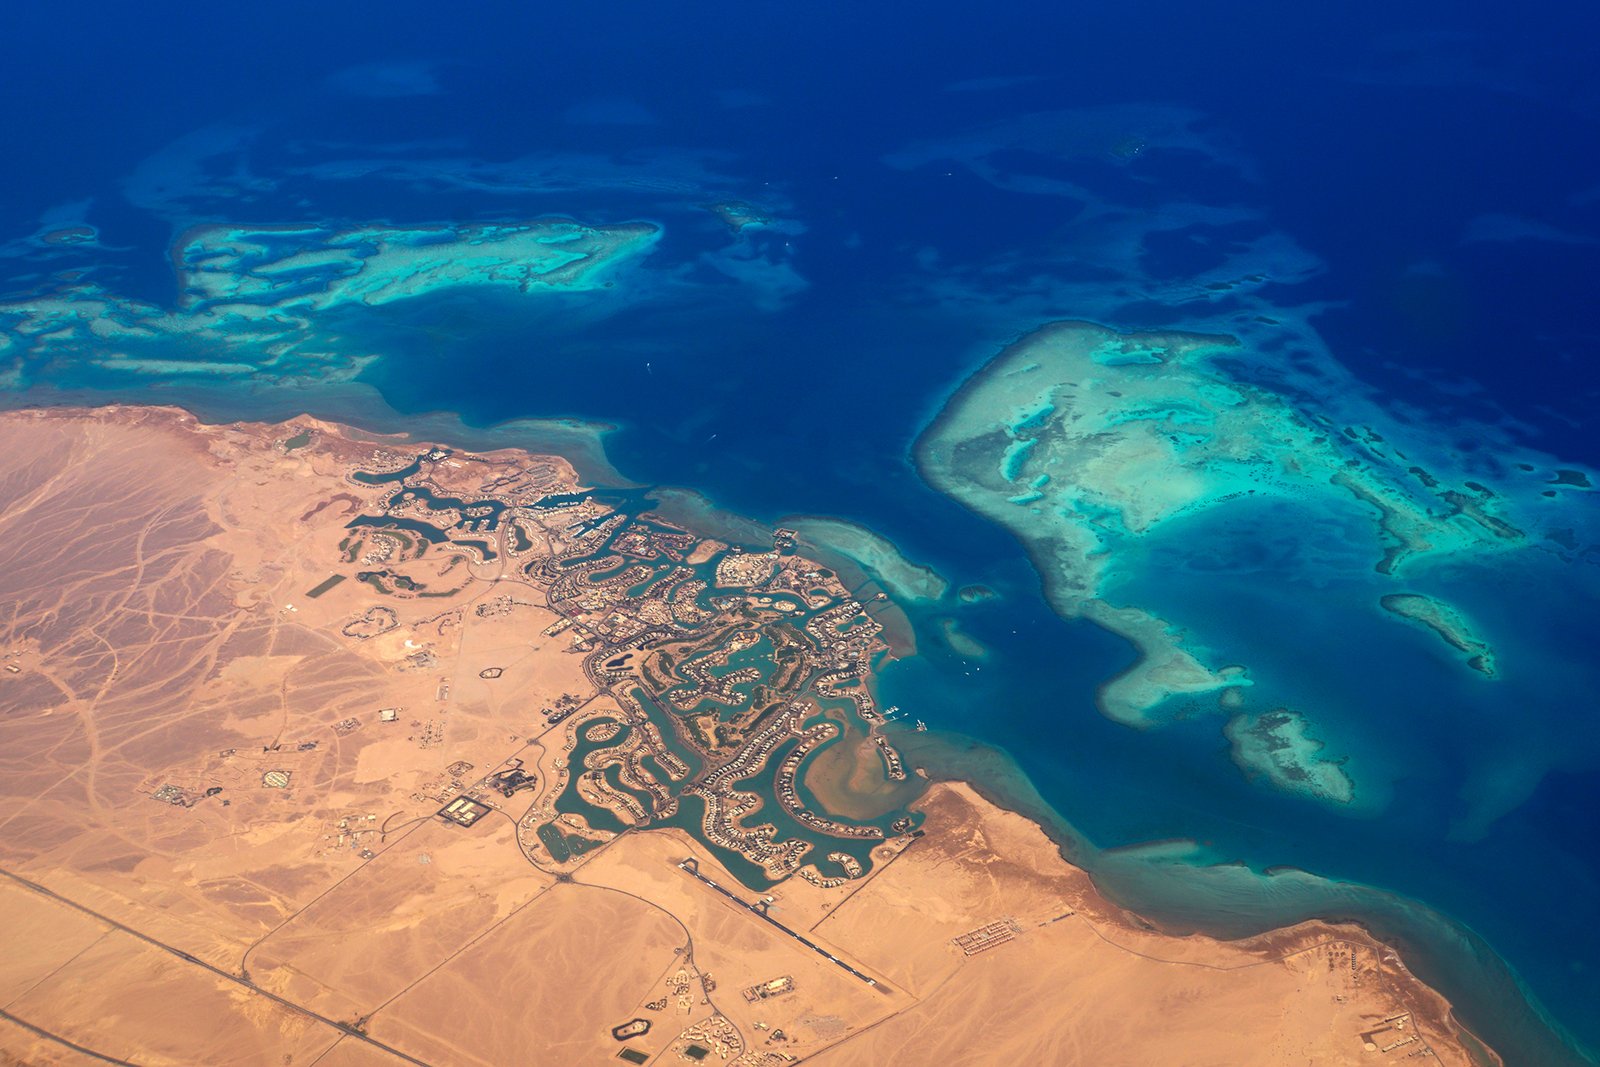 Top view shot from a beach in Egypt with coral reefs